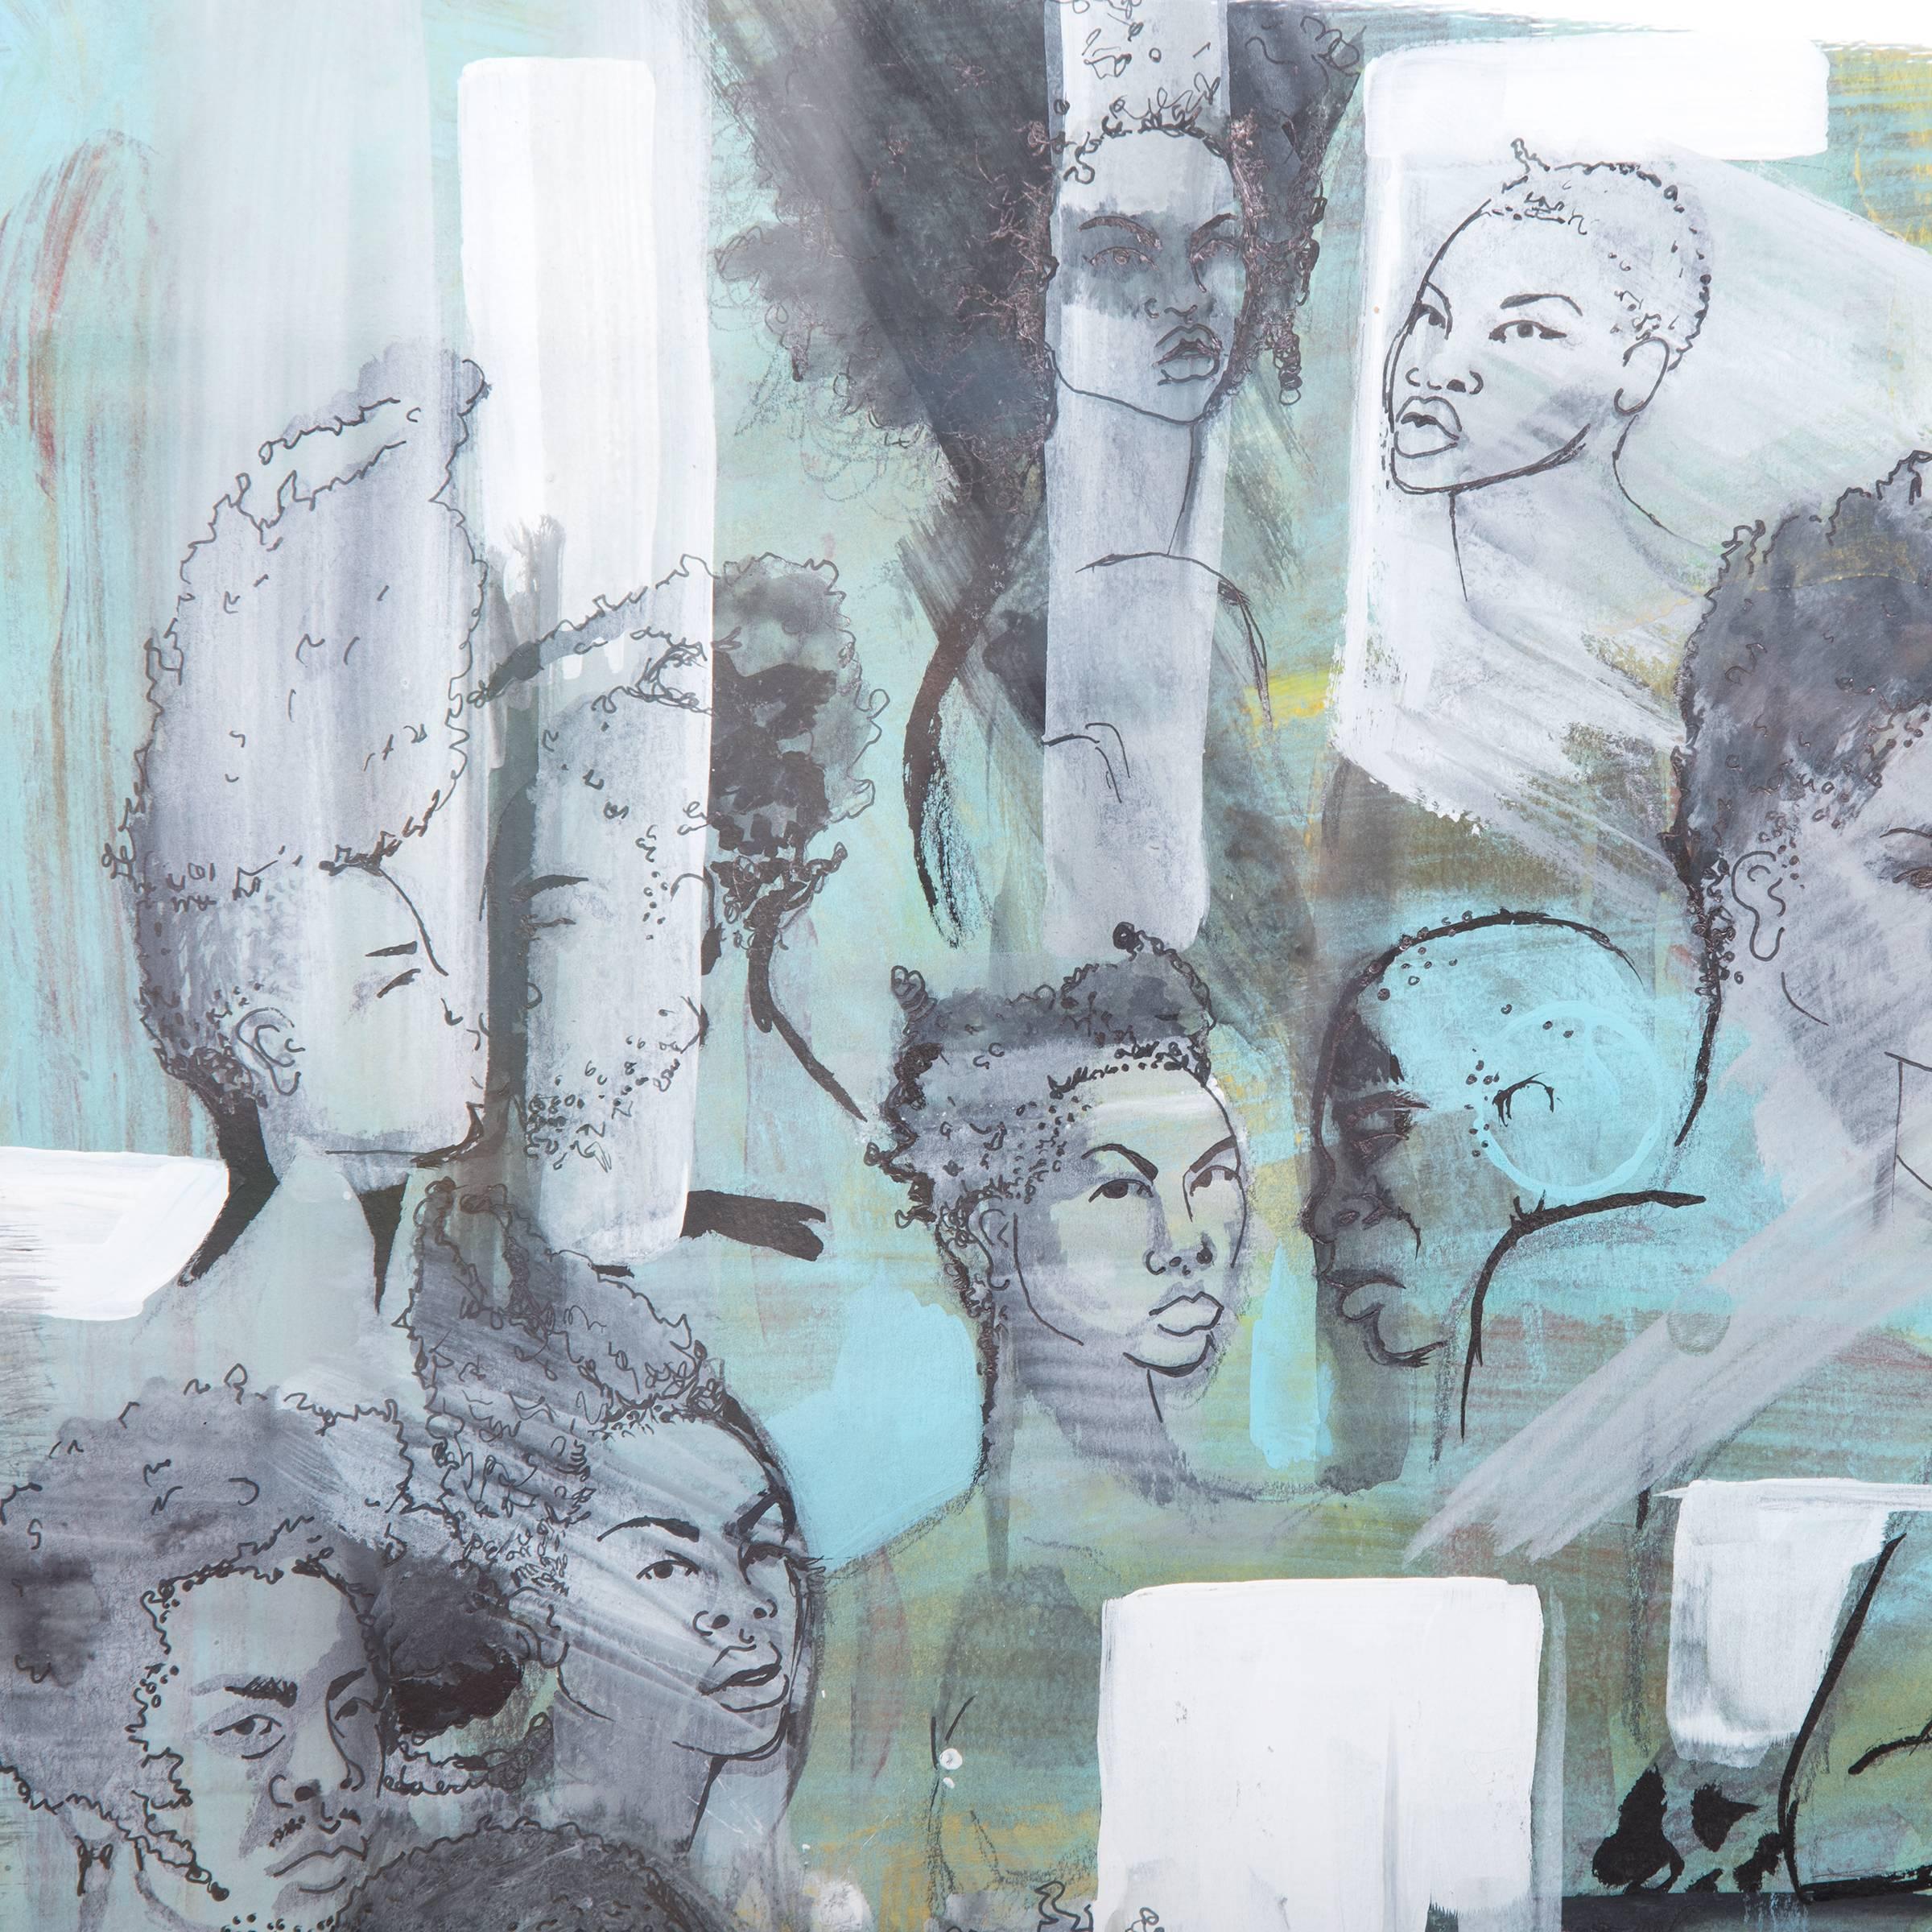 Tracy Crump uses washes of grey, white, and aqua to both conceal and reveal sensitively drawn figures. Each figure stands alone as an individual, possessing unique features and hairstyles, yet, as the title of the series suggests the men and women